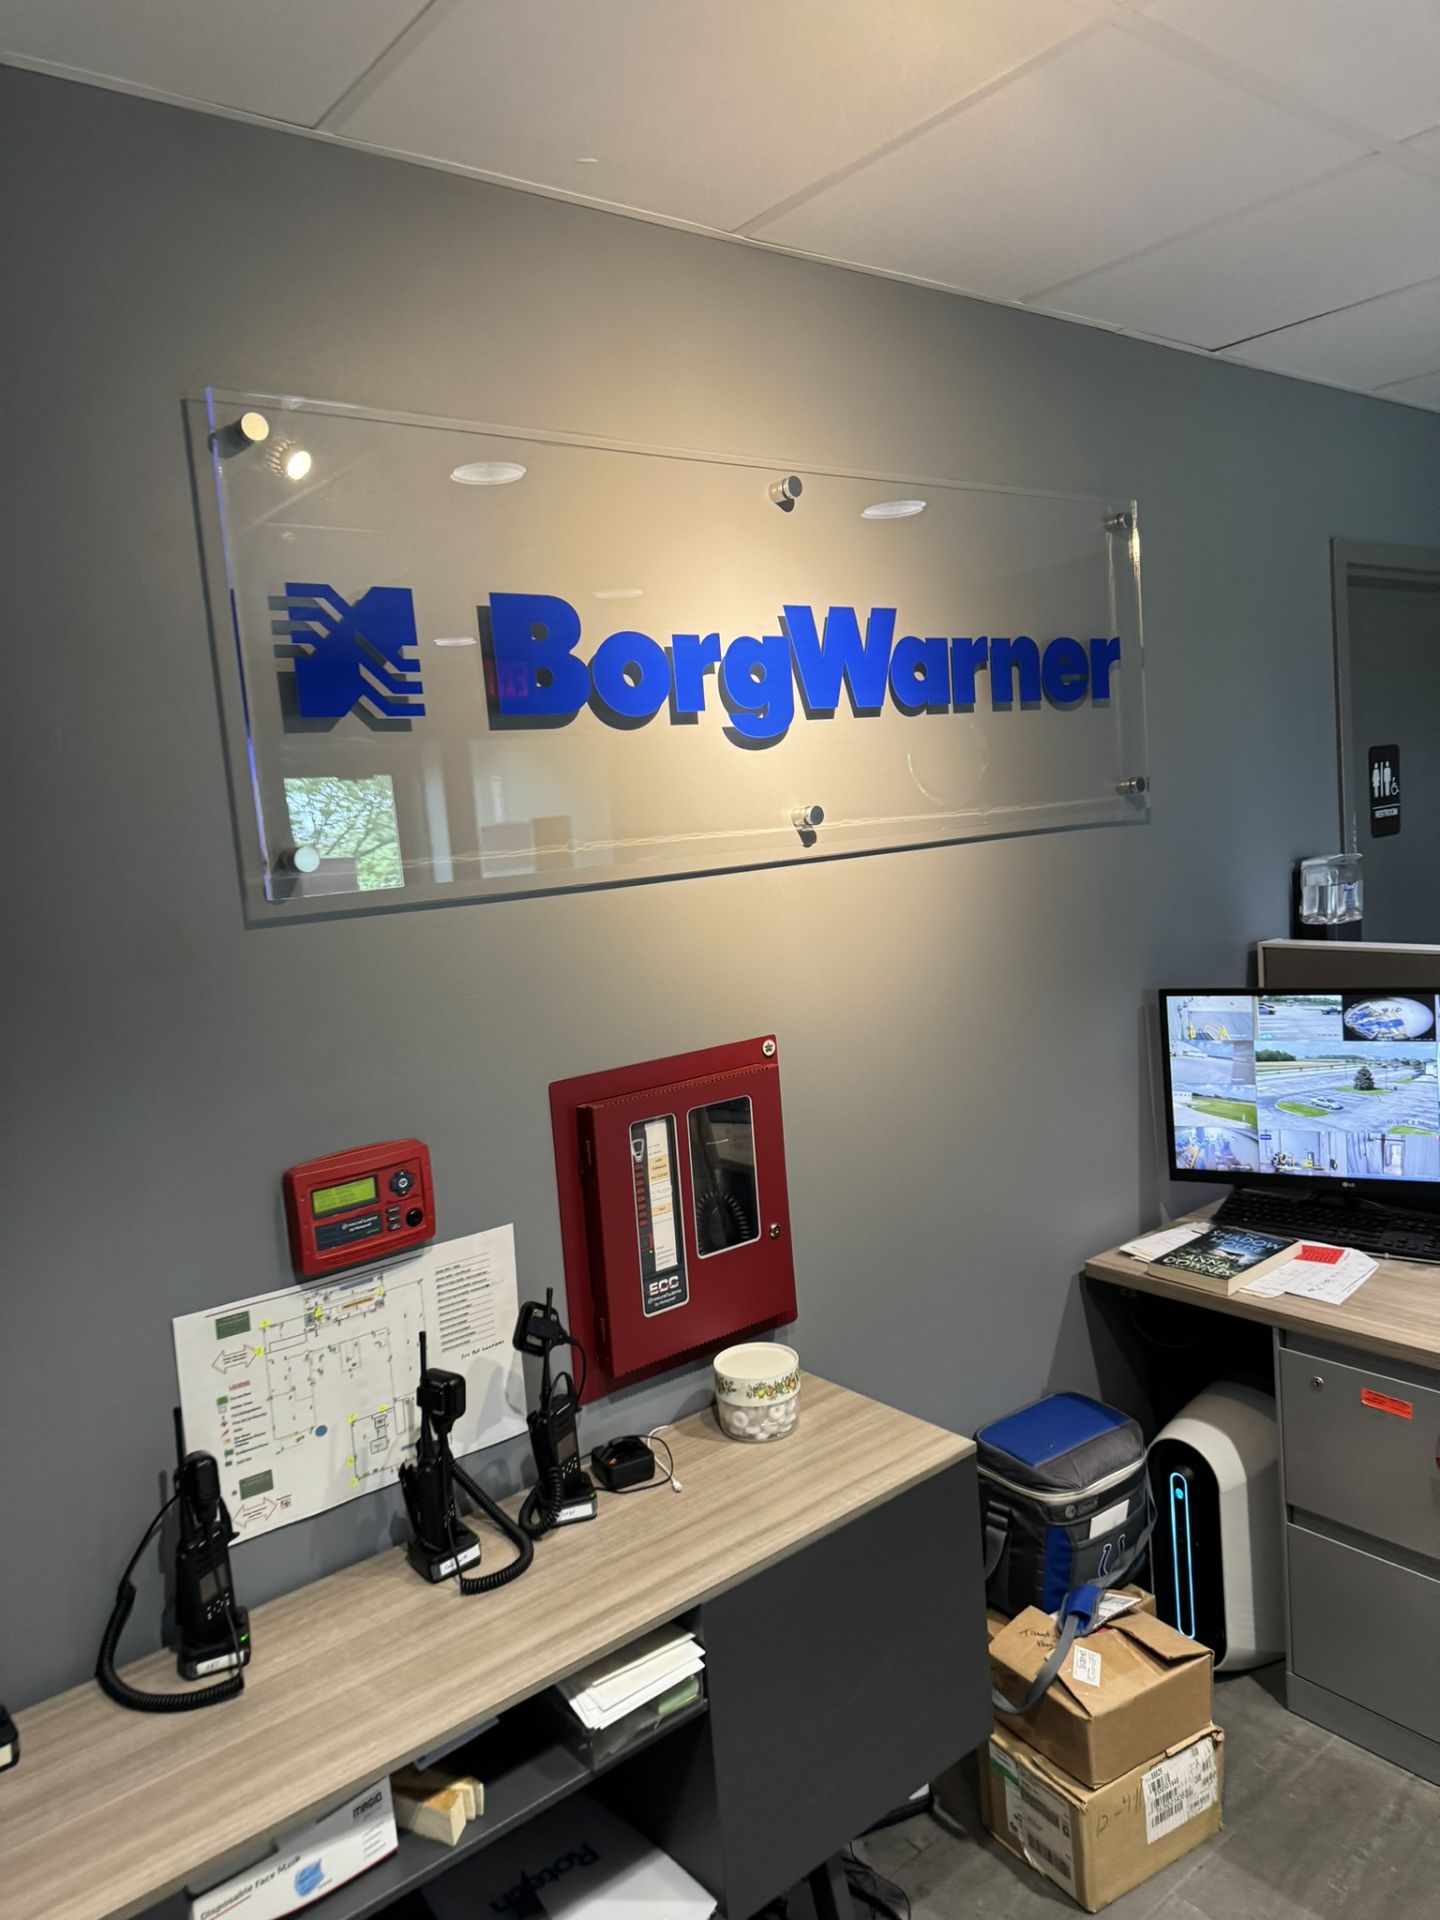 BORG WARNER SIGN (FOR RECREATIONAL USE ONLY)